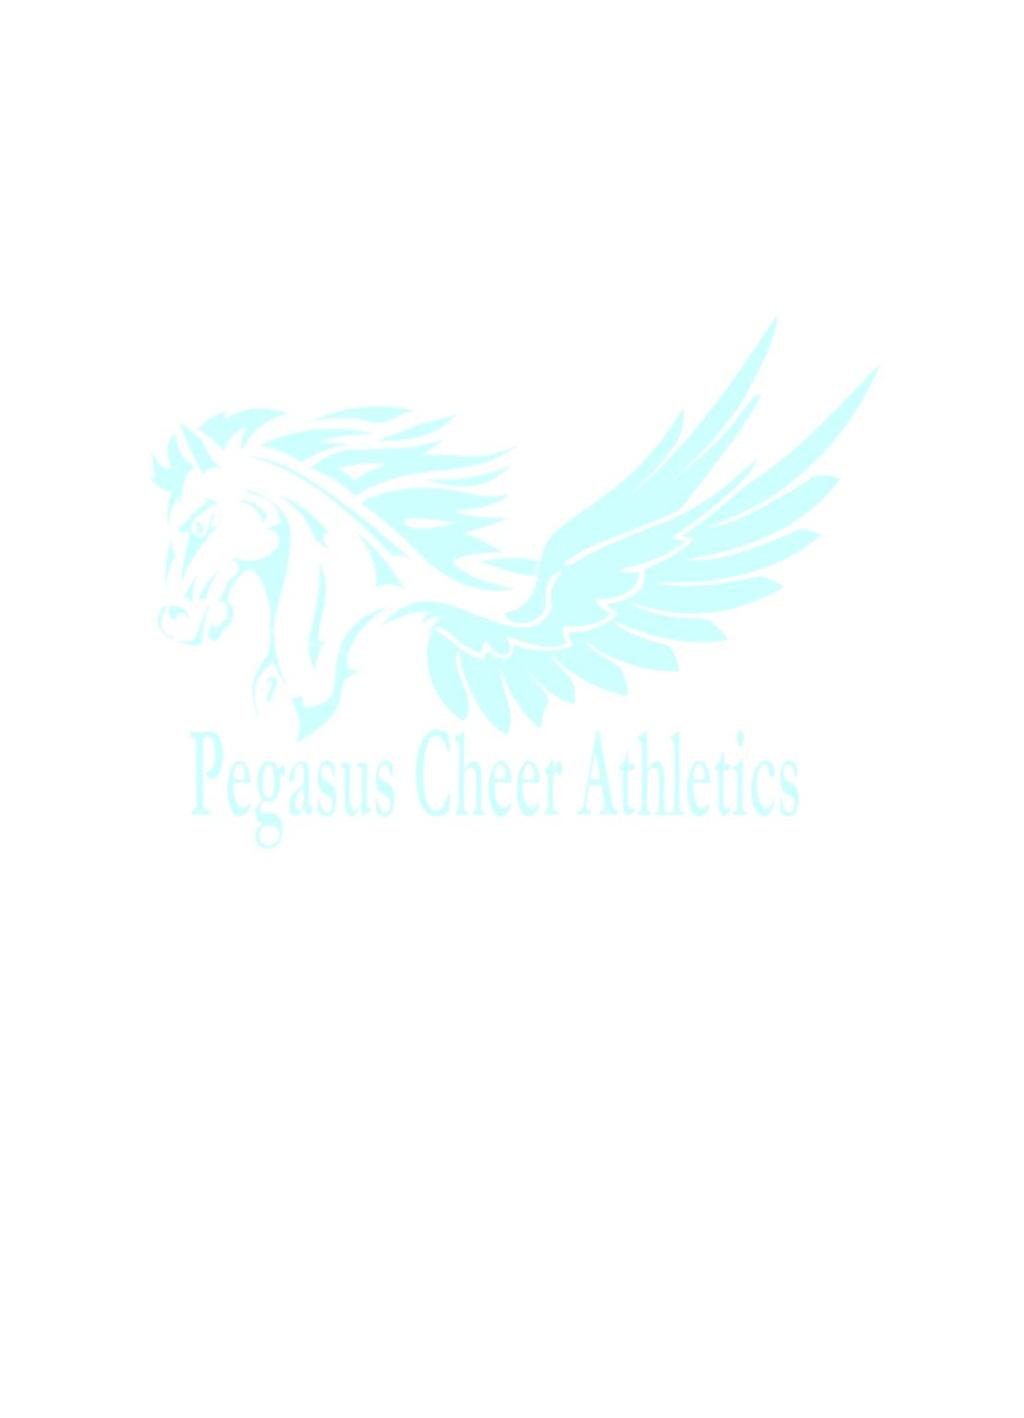 Welcome to Pegasus Cheer Athletics! We are very excited to offer a low cost, high value cheerleading program to the athletes and families of the Quinte region.